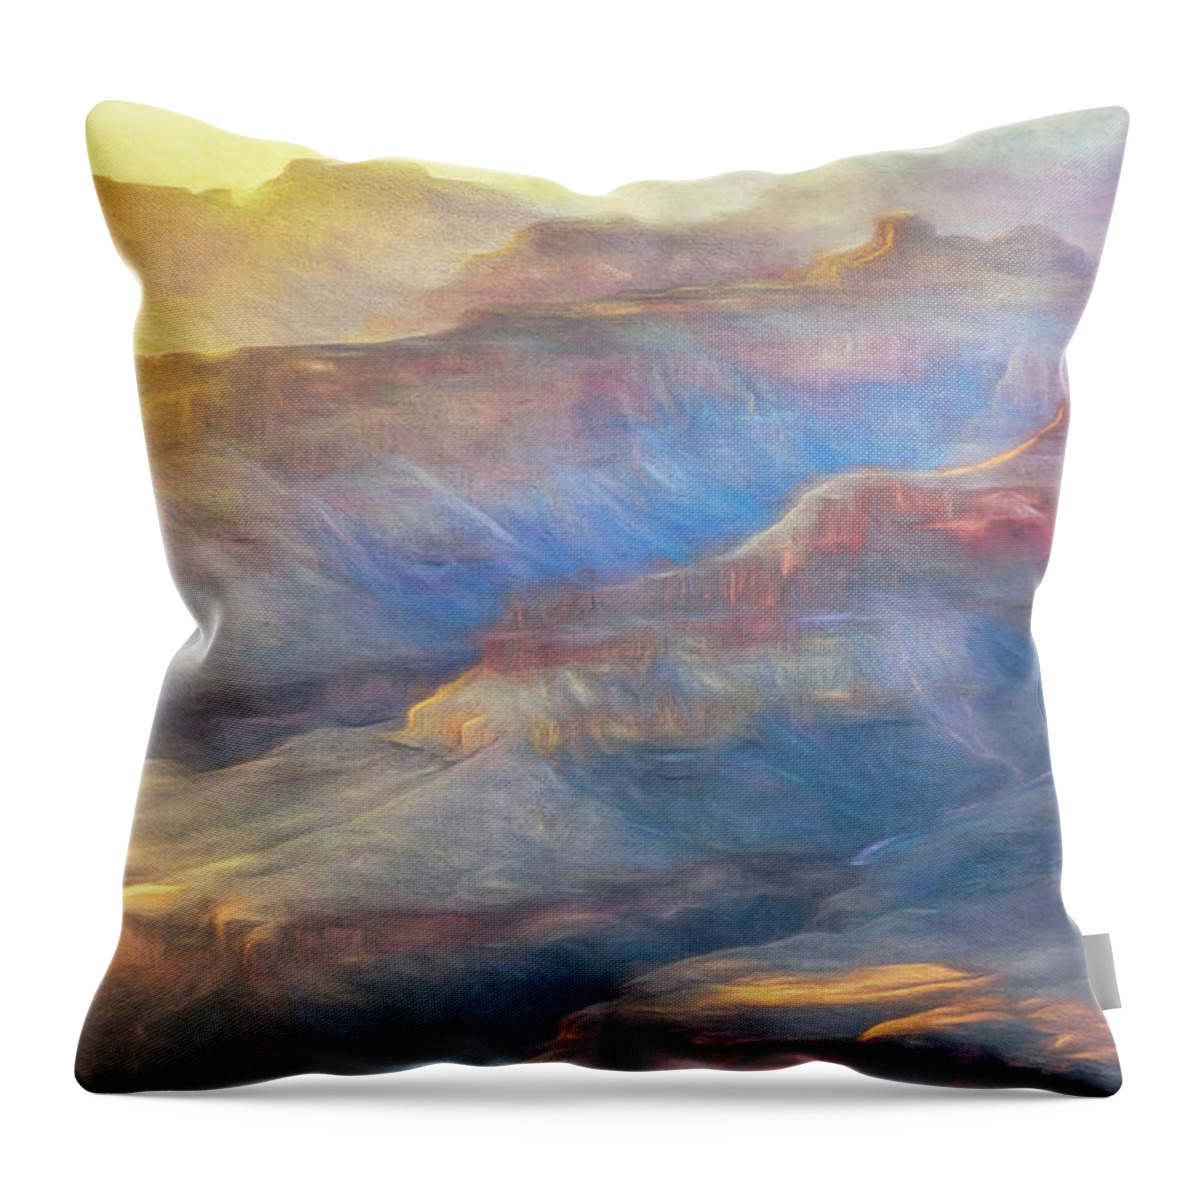 Grand Canyon Arizona Sunset Throw Pillow featuring the photograph Misty Sunset Shadows by Kevin Lane